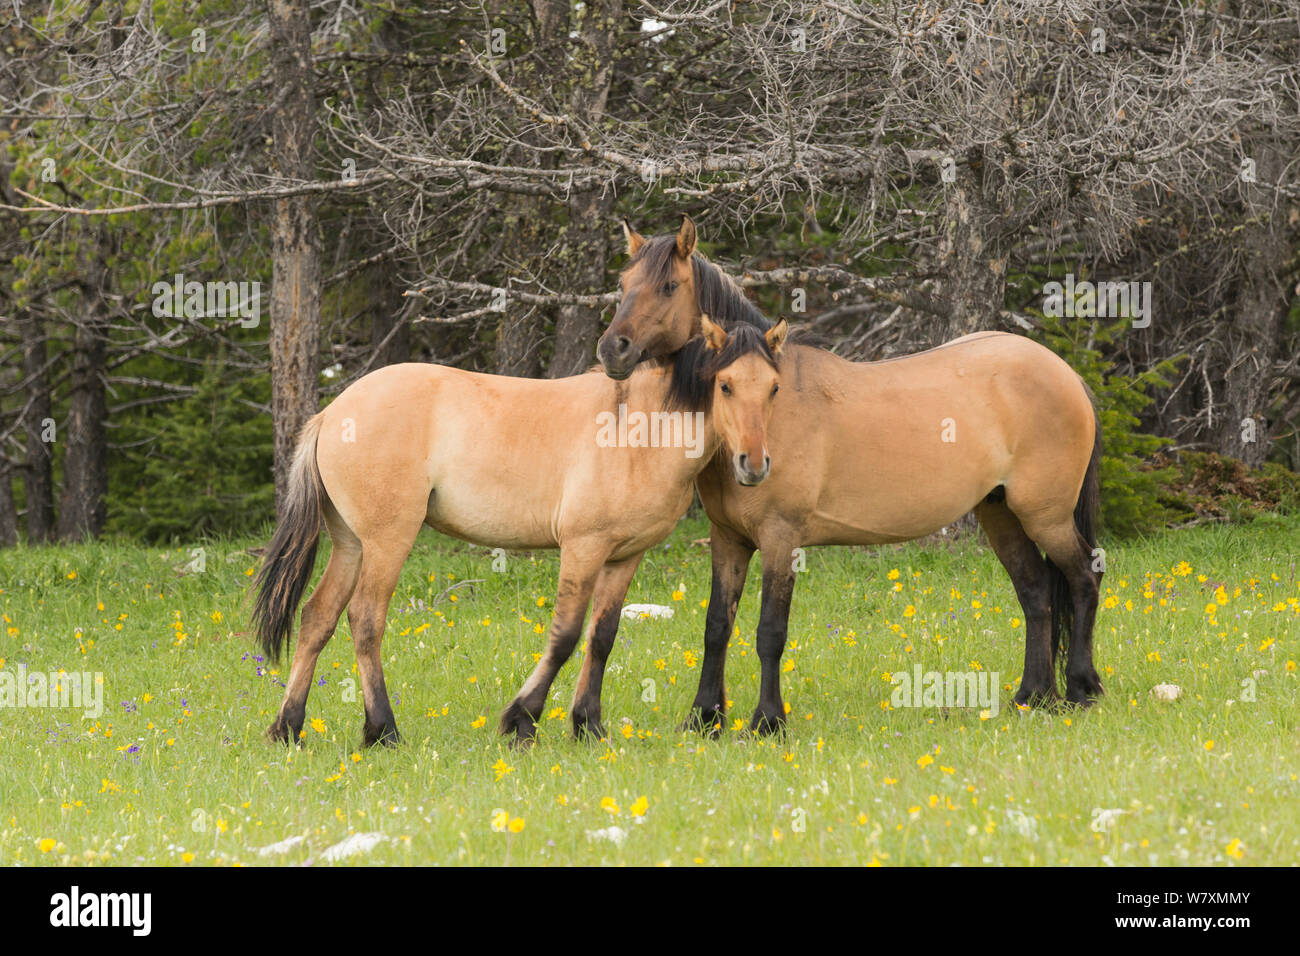 Wild horse (Equus ferus) mare and yearling. The yearling has leg bars or &#39;tiger stripes&#39;, a primitive marking indicating ties to earliest mustangs brought to the USA by the Spanish. Pryor Mountains, Montana, USA, June. Stock Photo